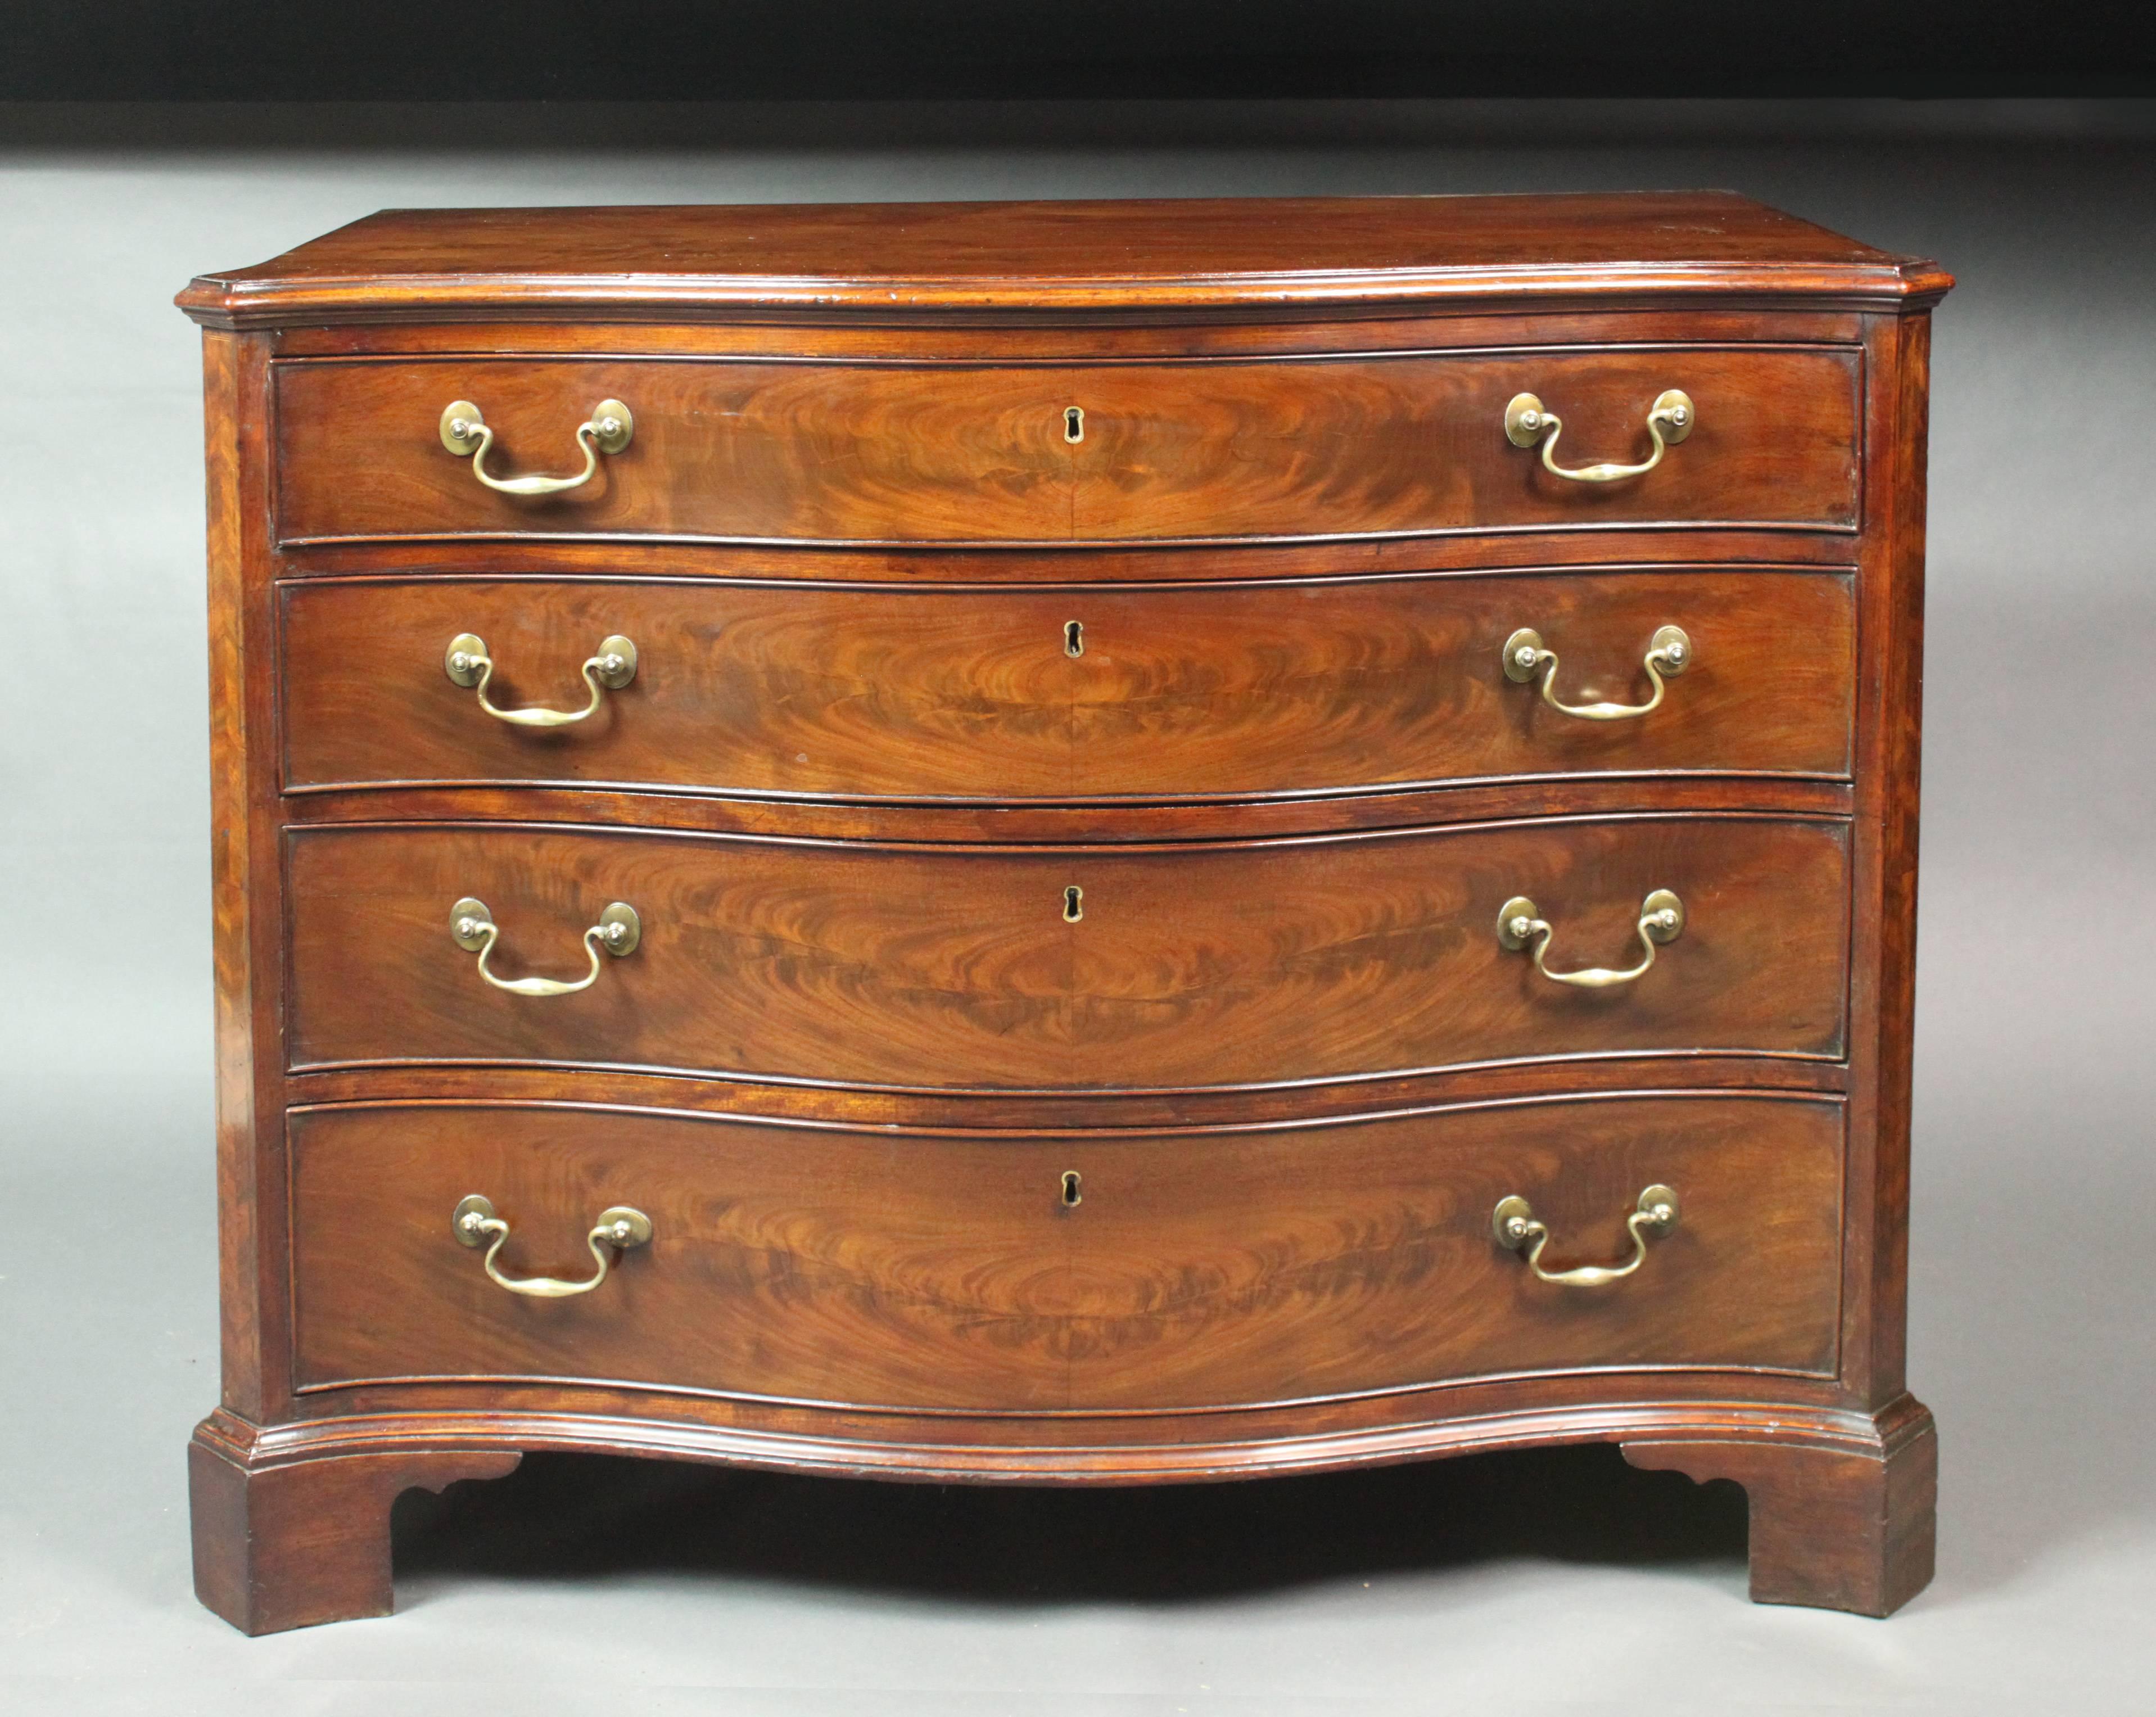 A fine George III serpentine-front Chippendale period commode in superb figured mahogany. Good model: canted corners with herringbone inlay, shaped sides, panelled back, original handles and bracket feet; the top drawer with brushing slide and